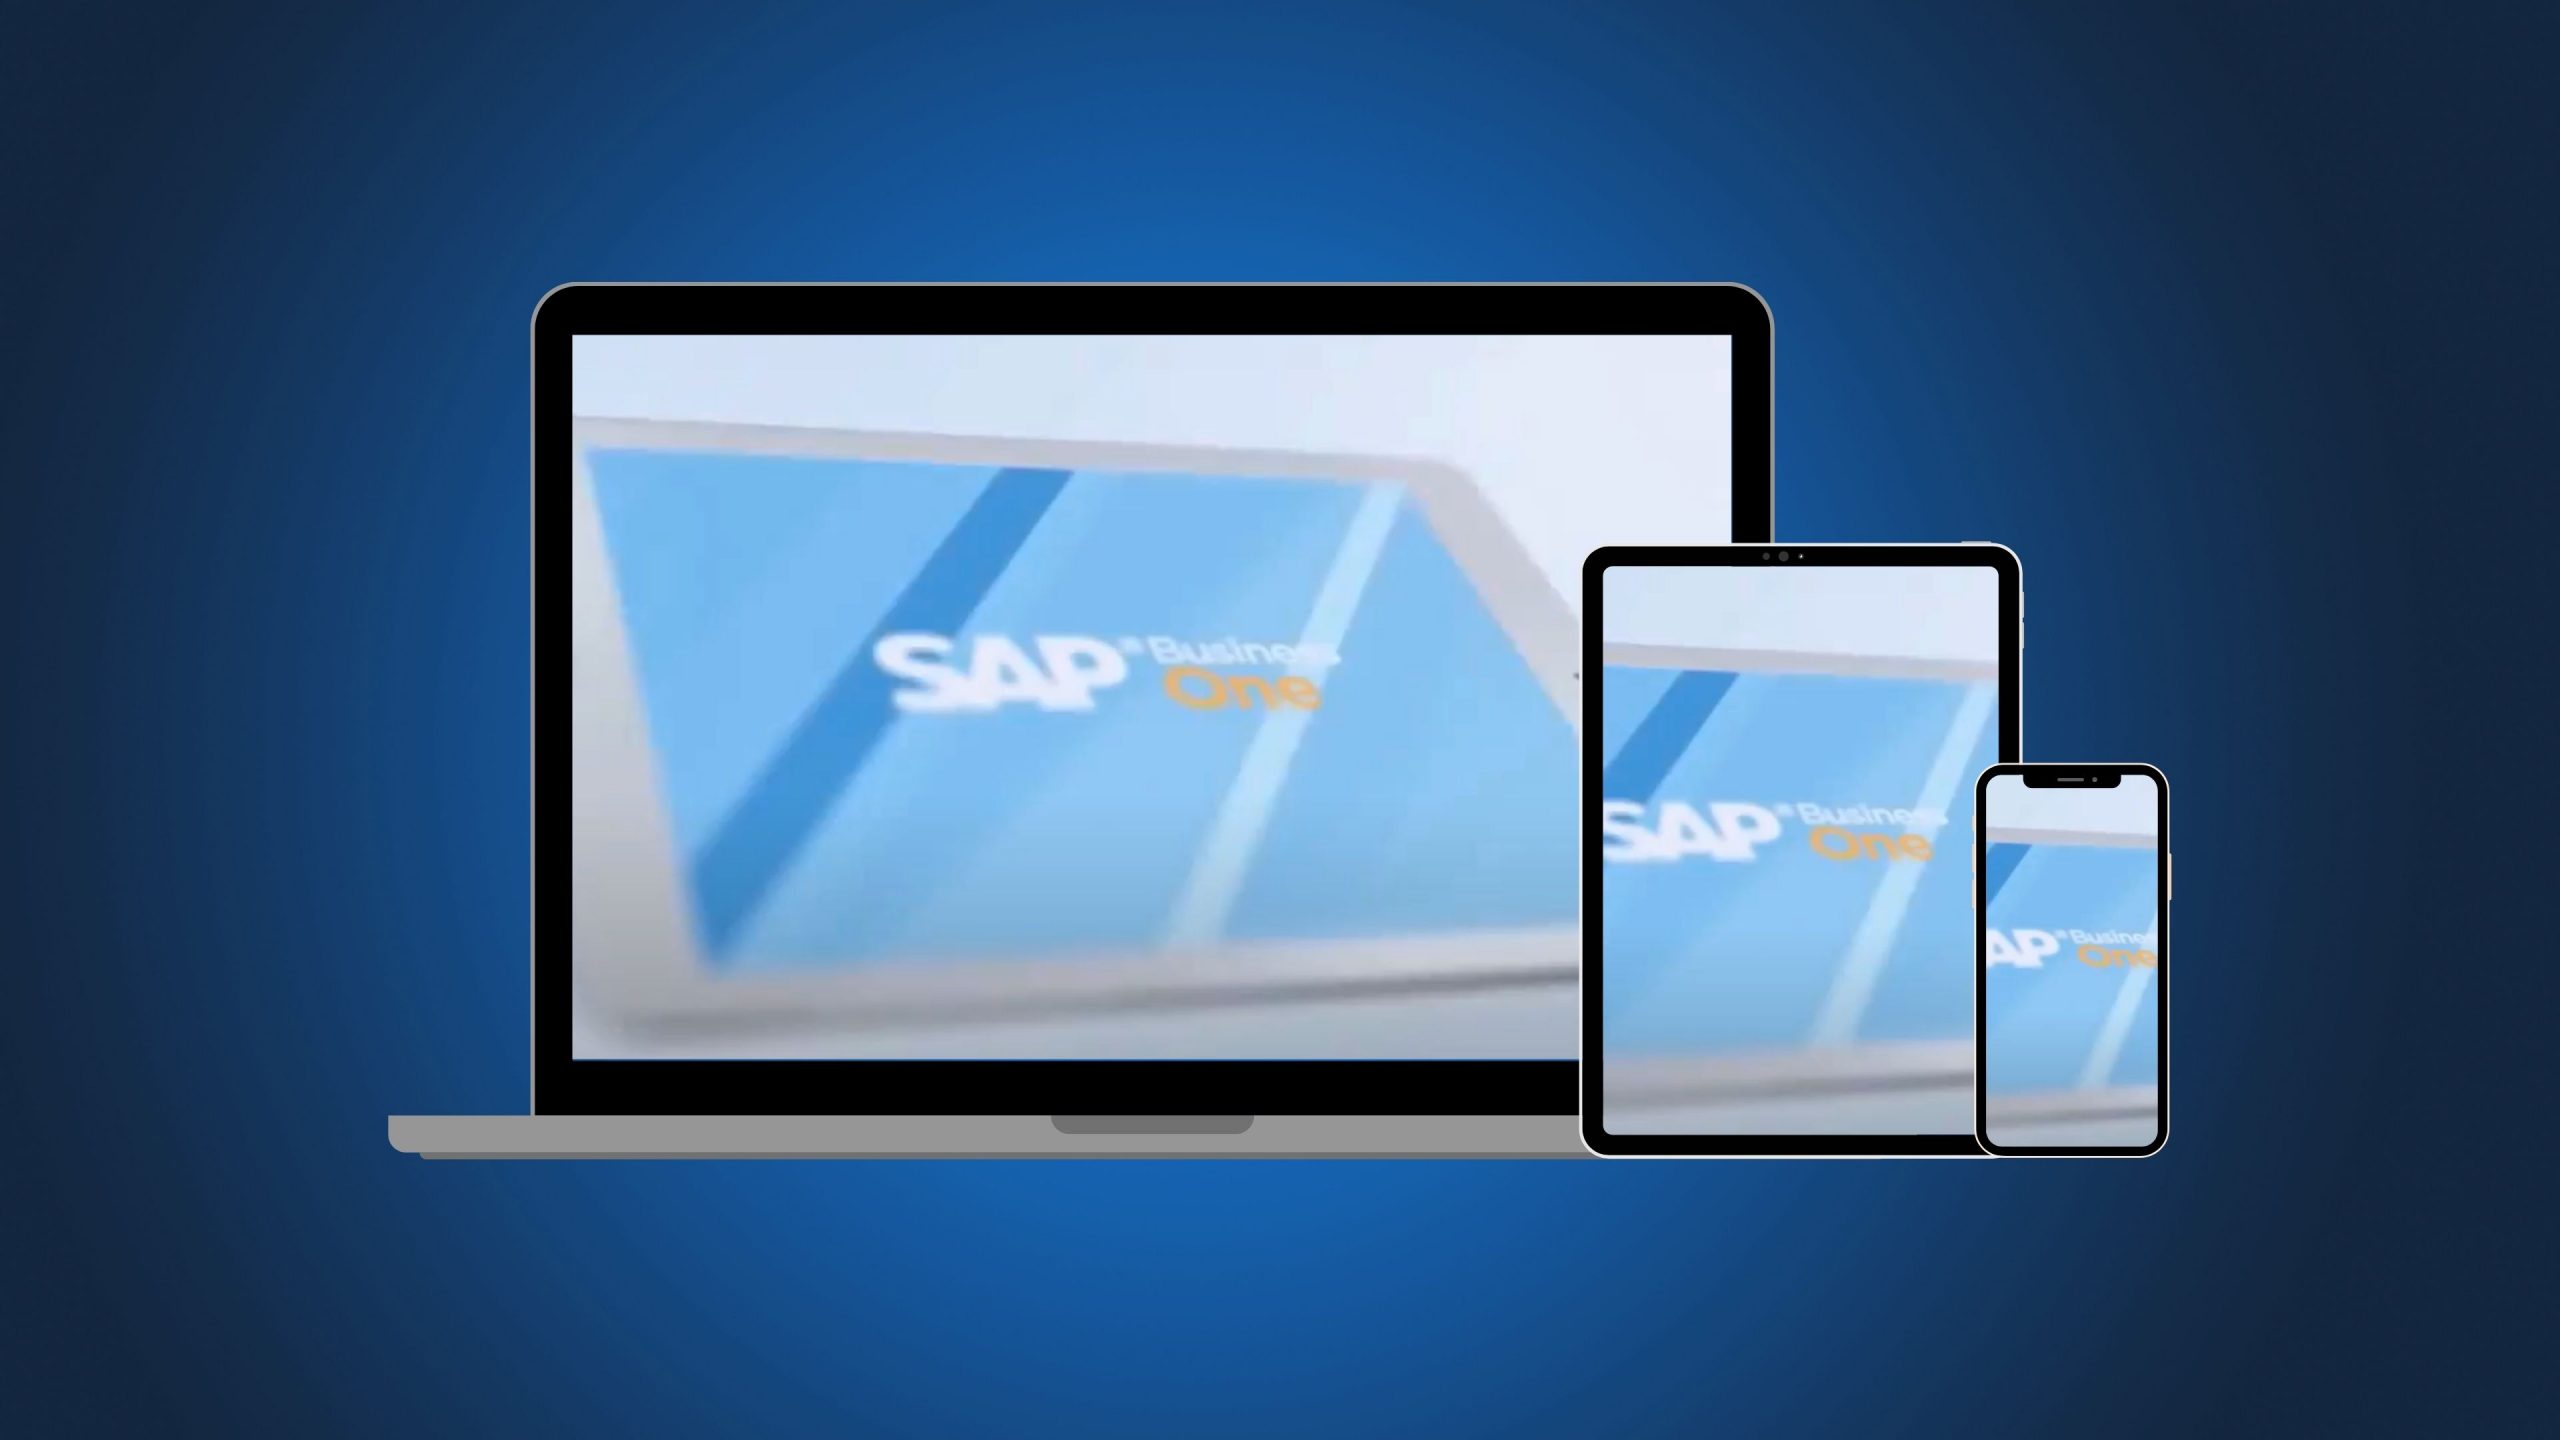 SAP Business One in 60 seconds